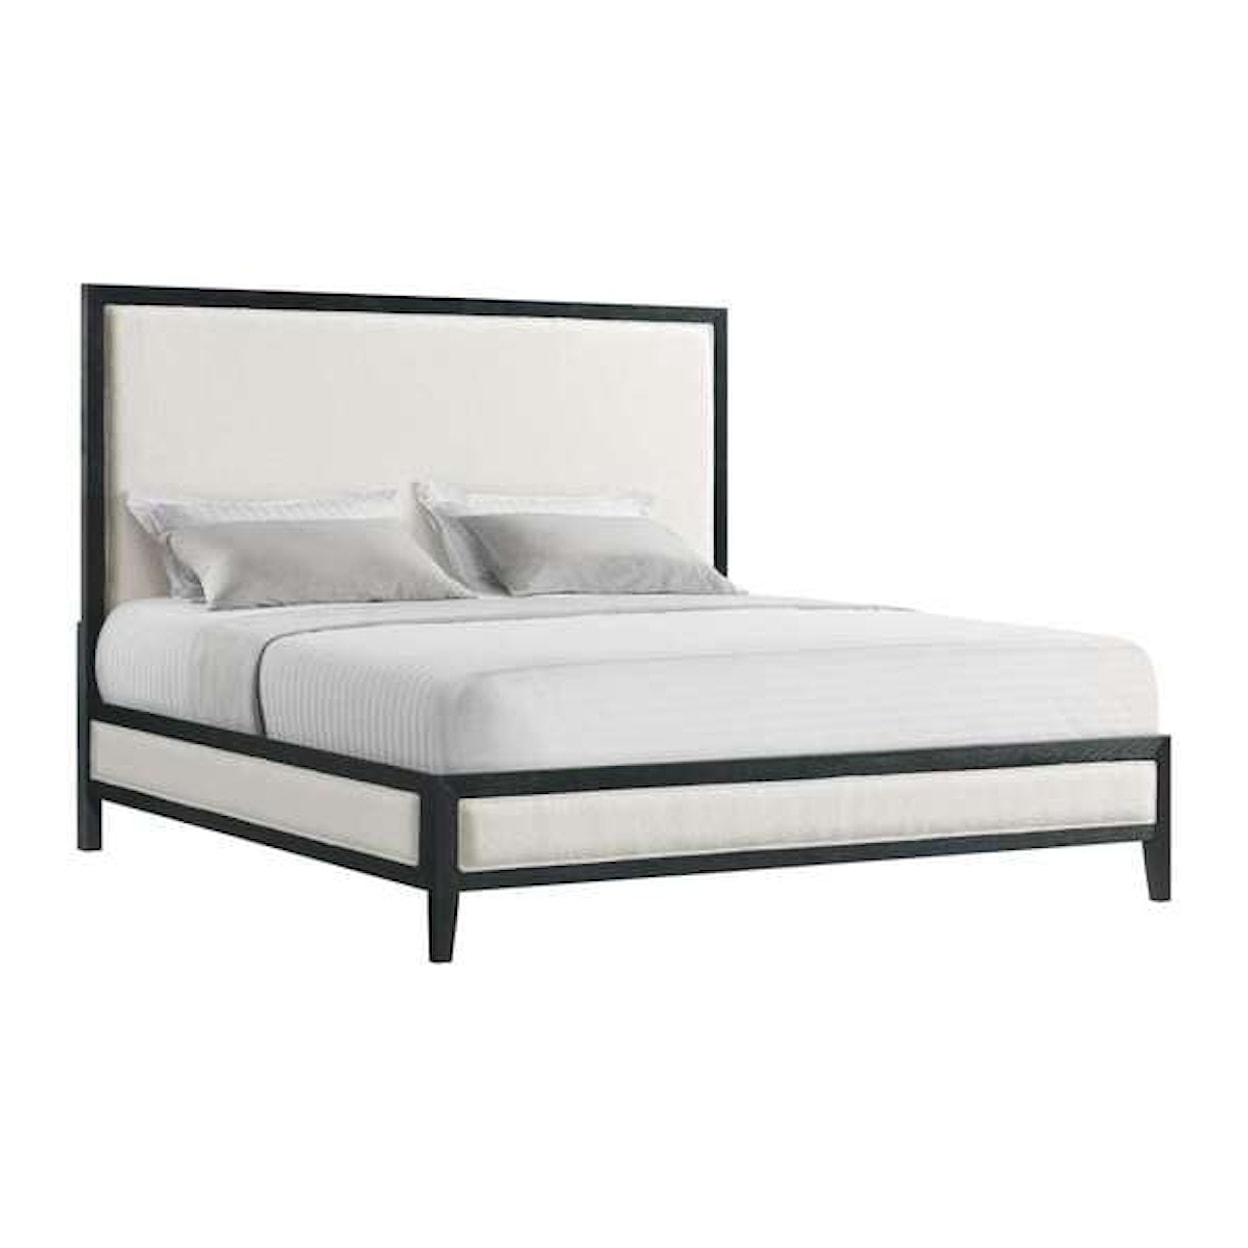 Elements International Versailles Contemporary King Bed